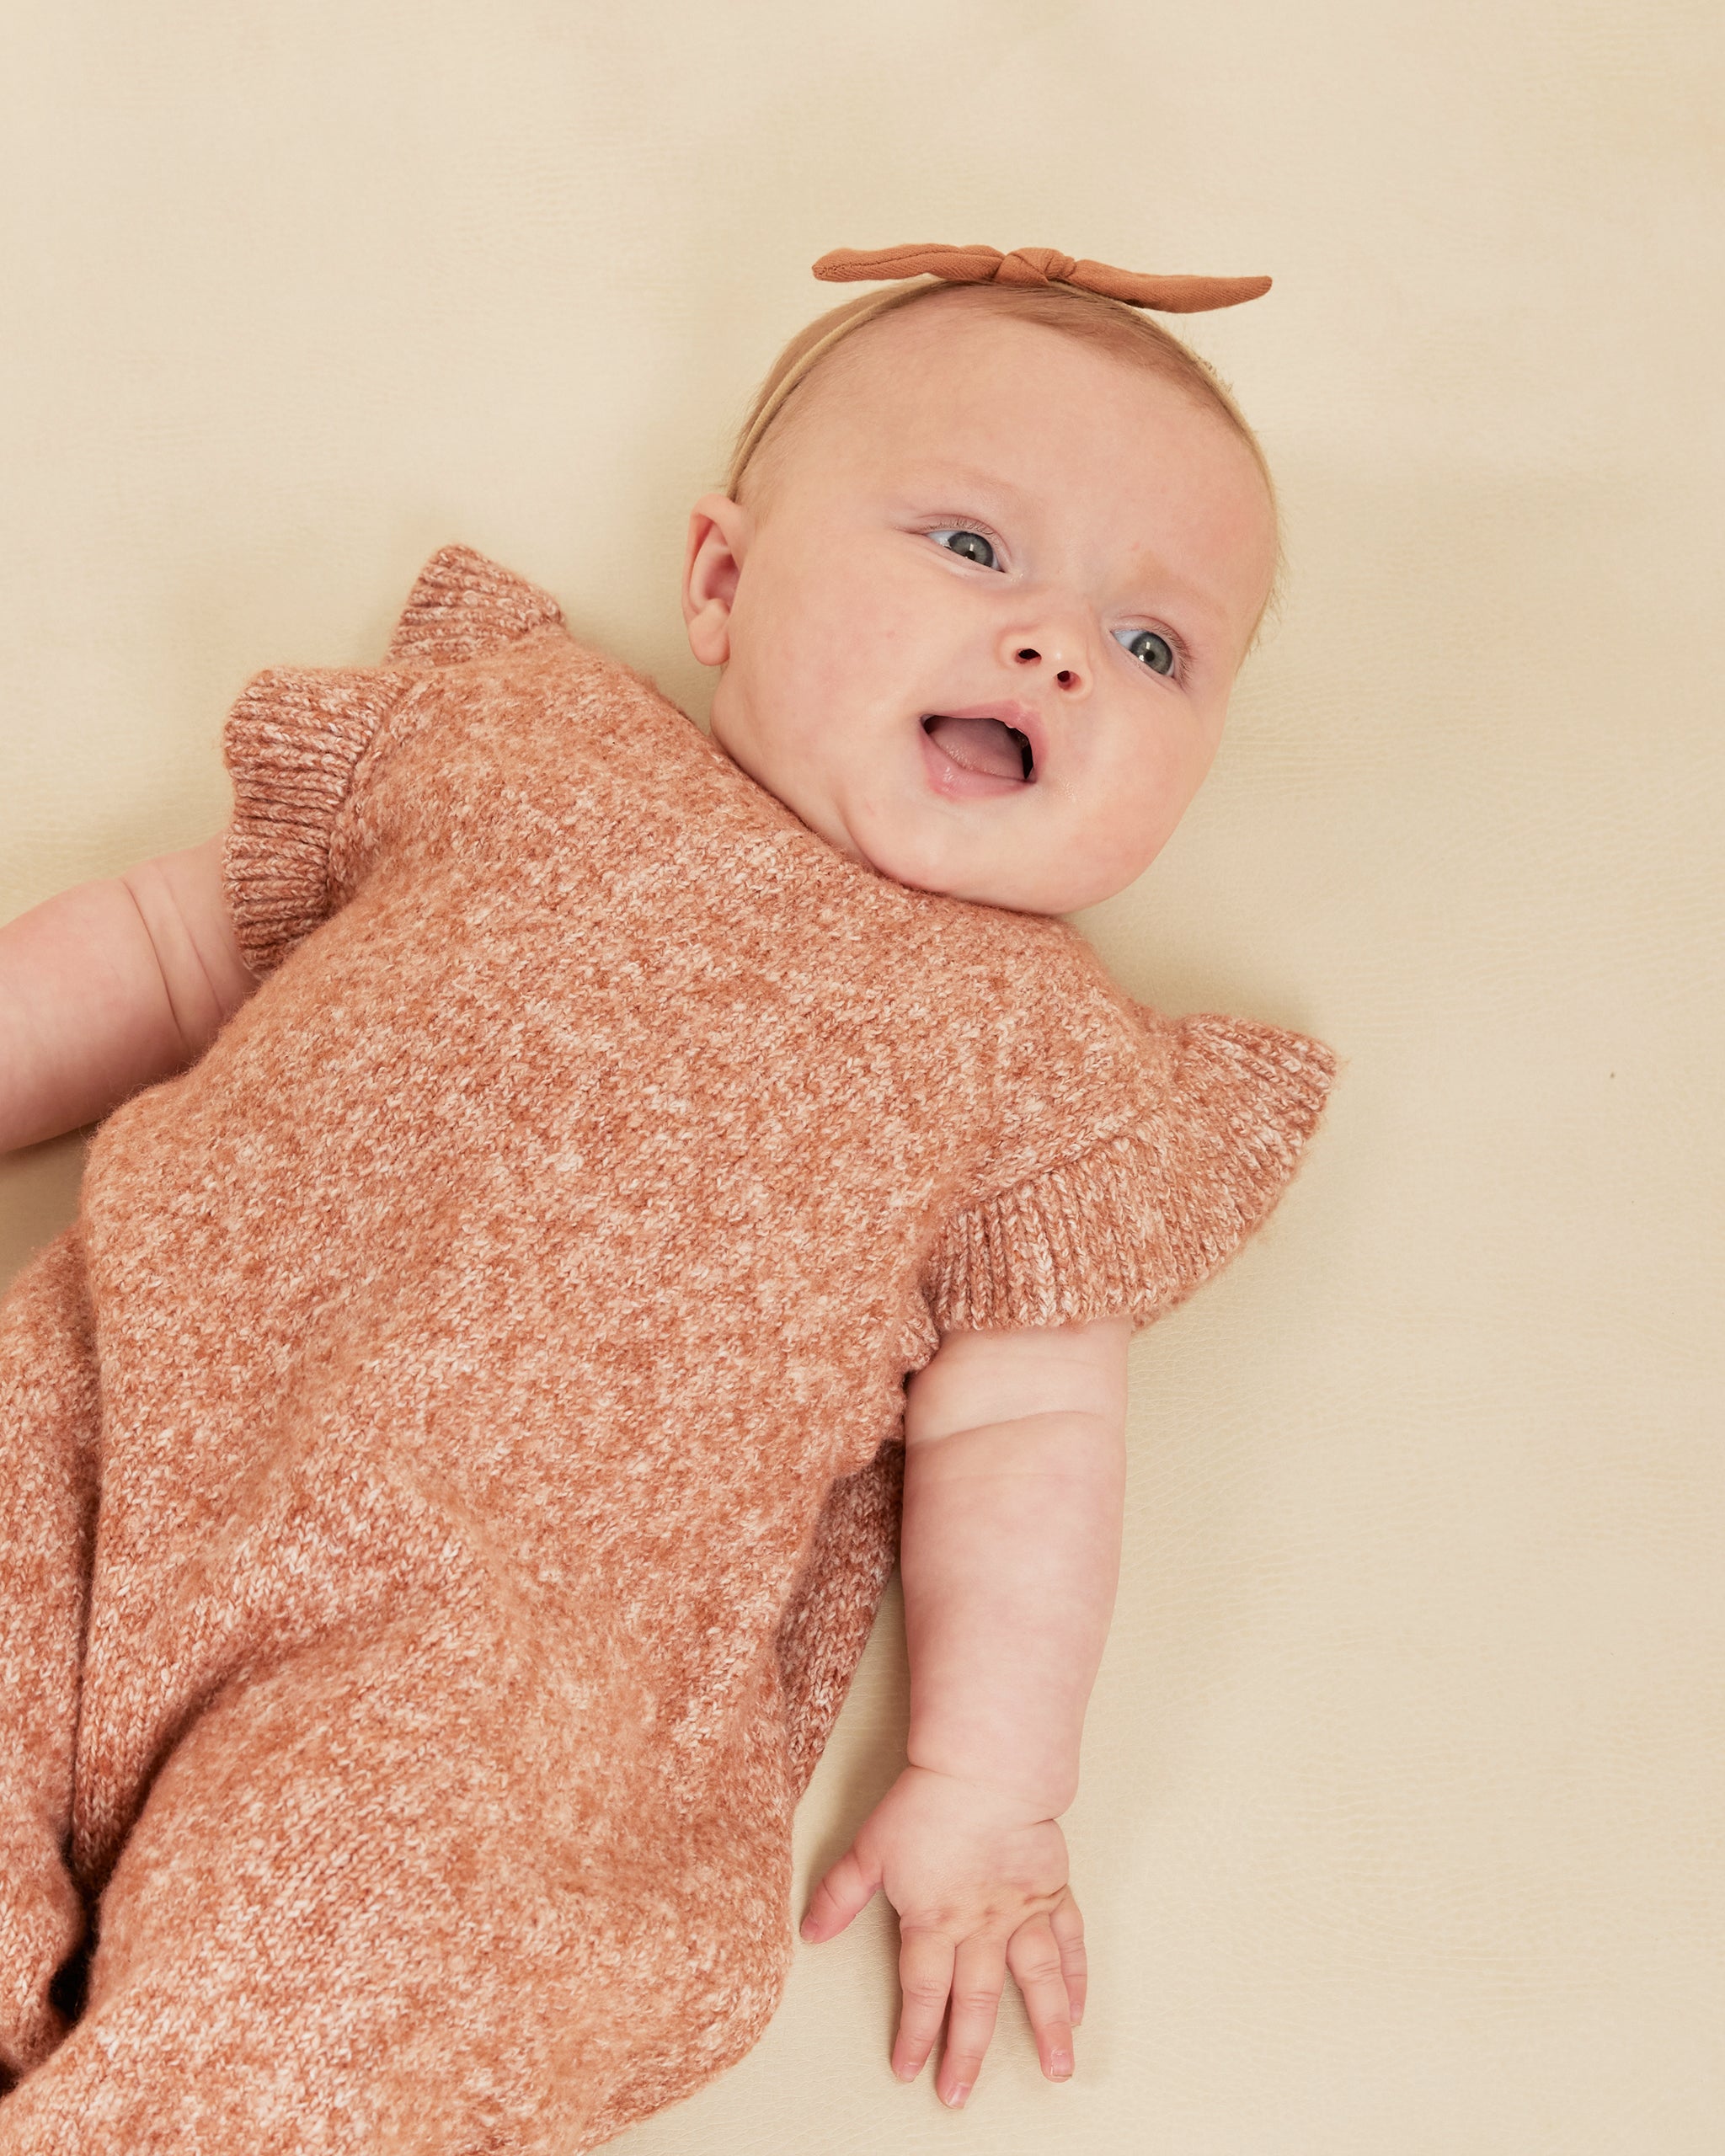 Mira Knit Romper || Heathered Clay - Rylee + Cru | Kids Clothes | Trendy Baby Clothes | Modern Infant Outfits |